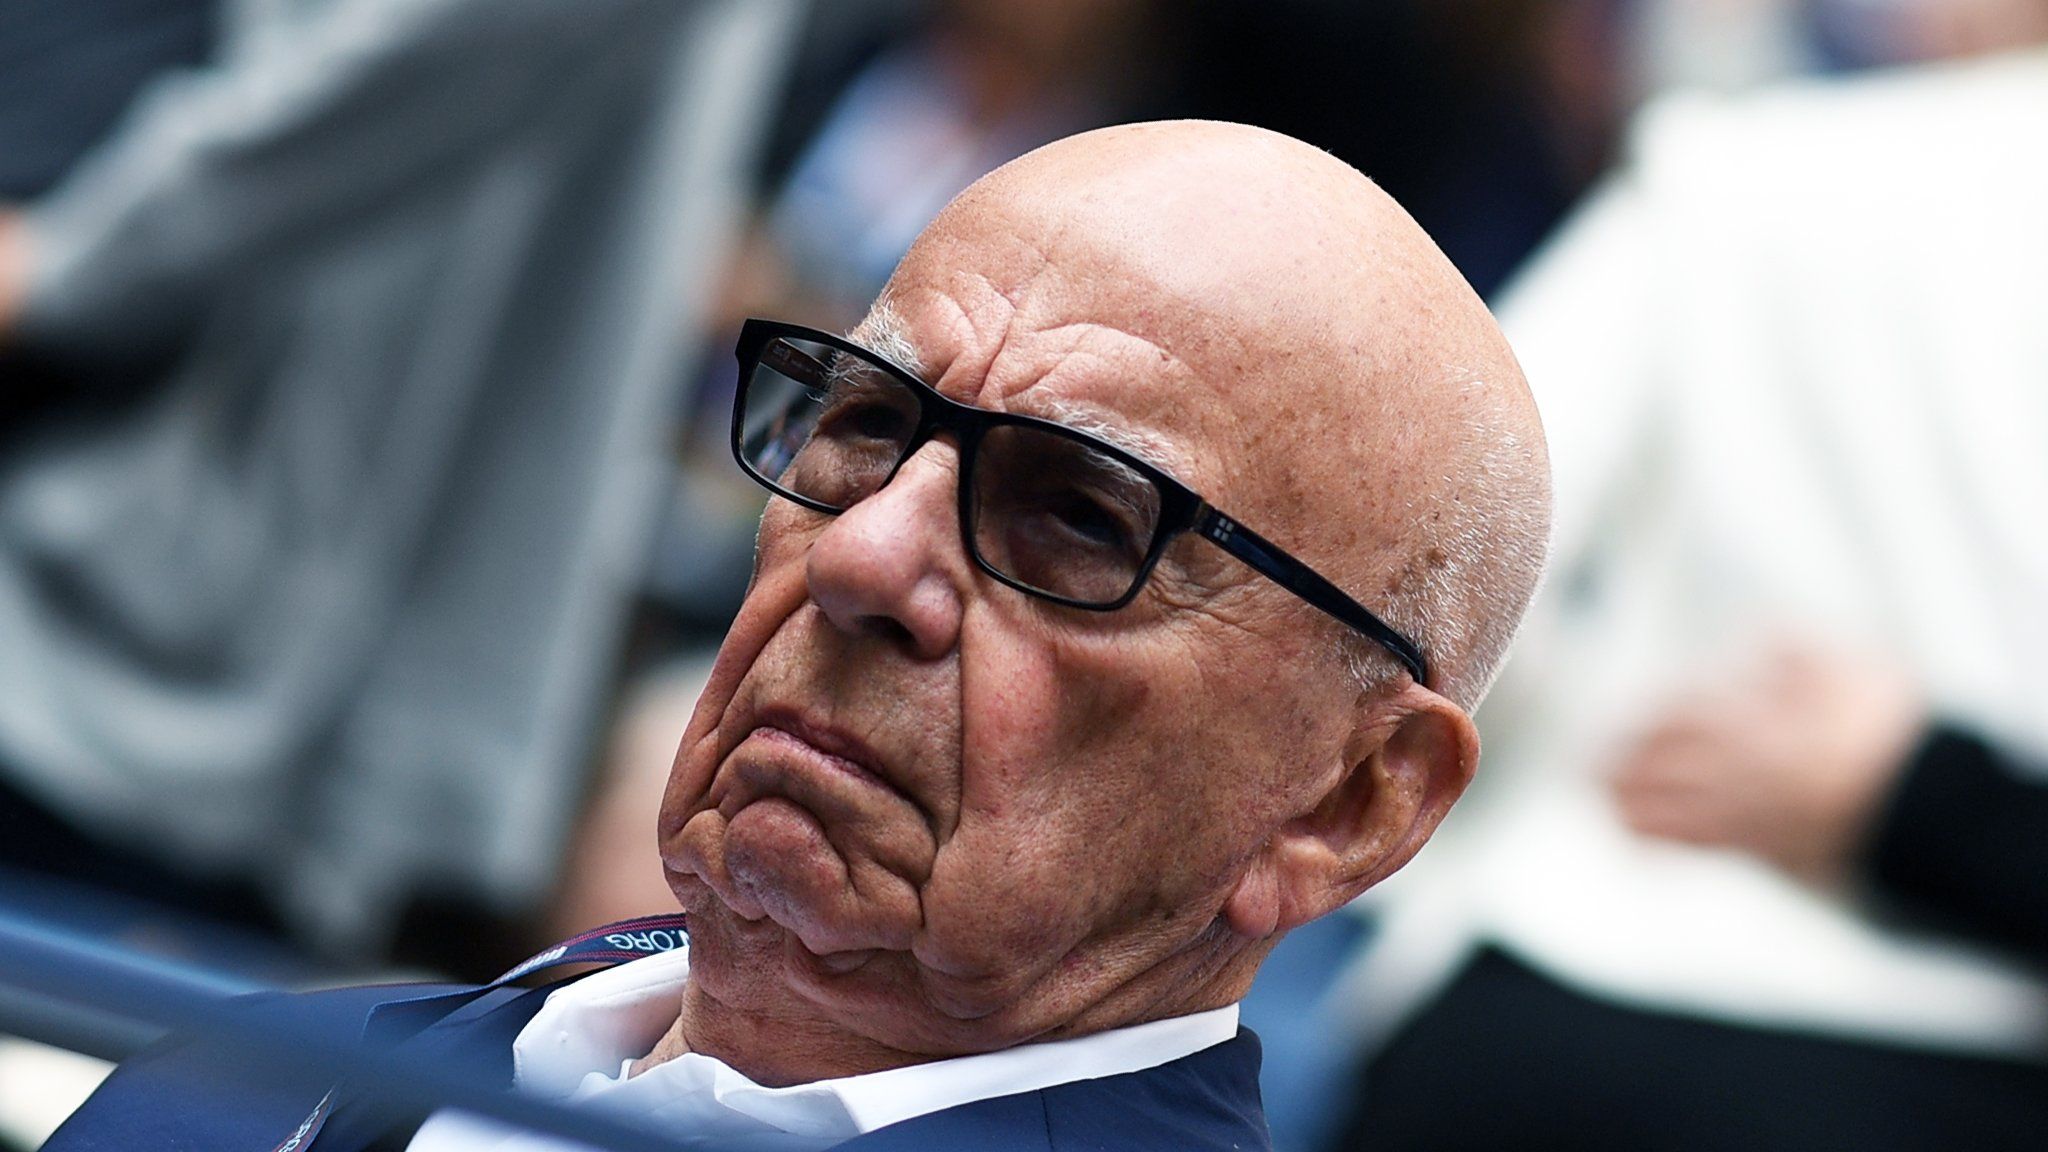 Rupert Murdoch arrives to watch the 2017 US Open Men's Singles final match between Spain's Rafael Nadal and South Africa's Kevin Anderson, at the USTA Billie Jean King National Tennis Center in New York on September 10, 2017.